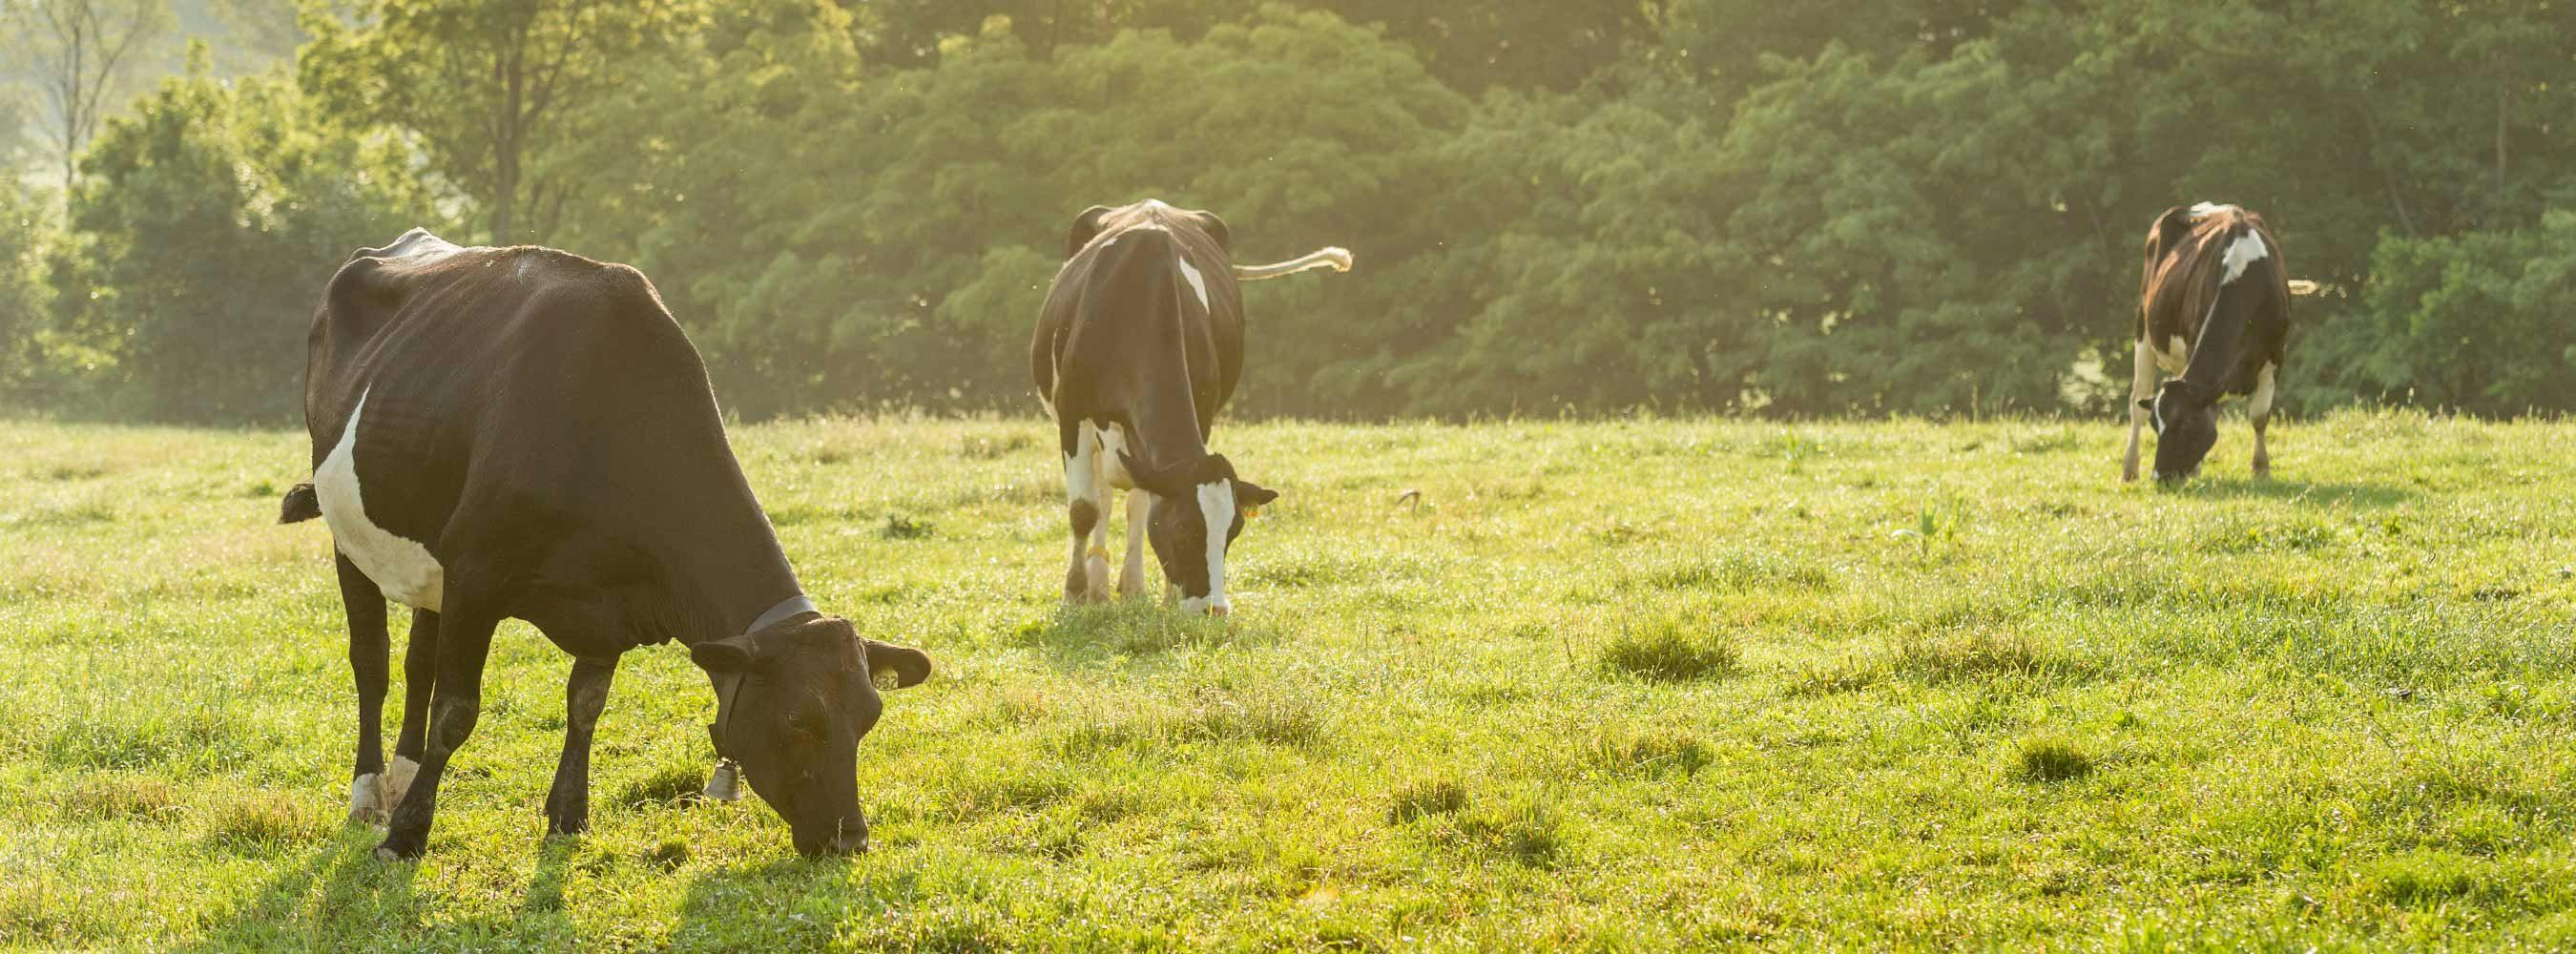 Our organic ghee is solid gold because it comes from organic, pasture-raised cows